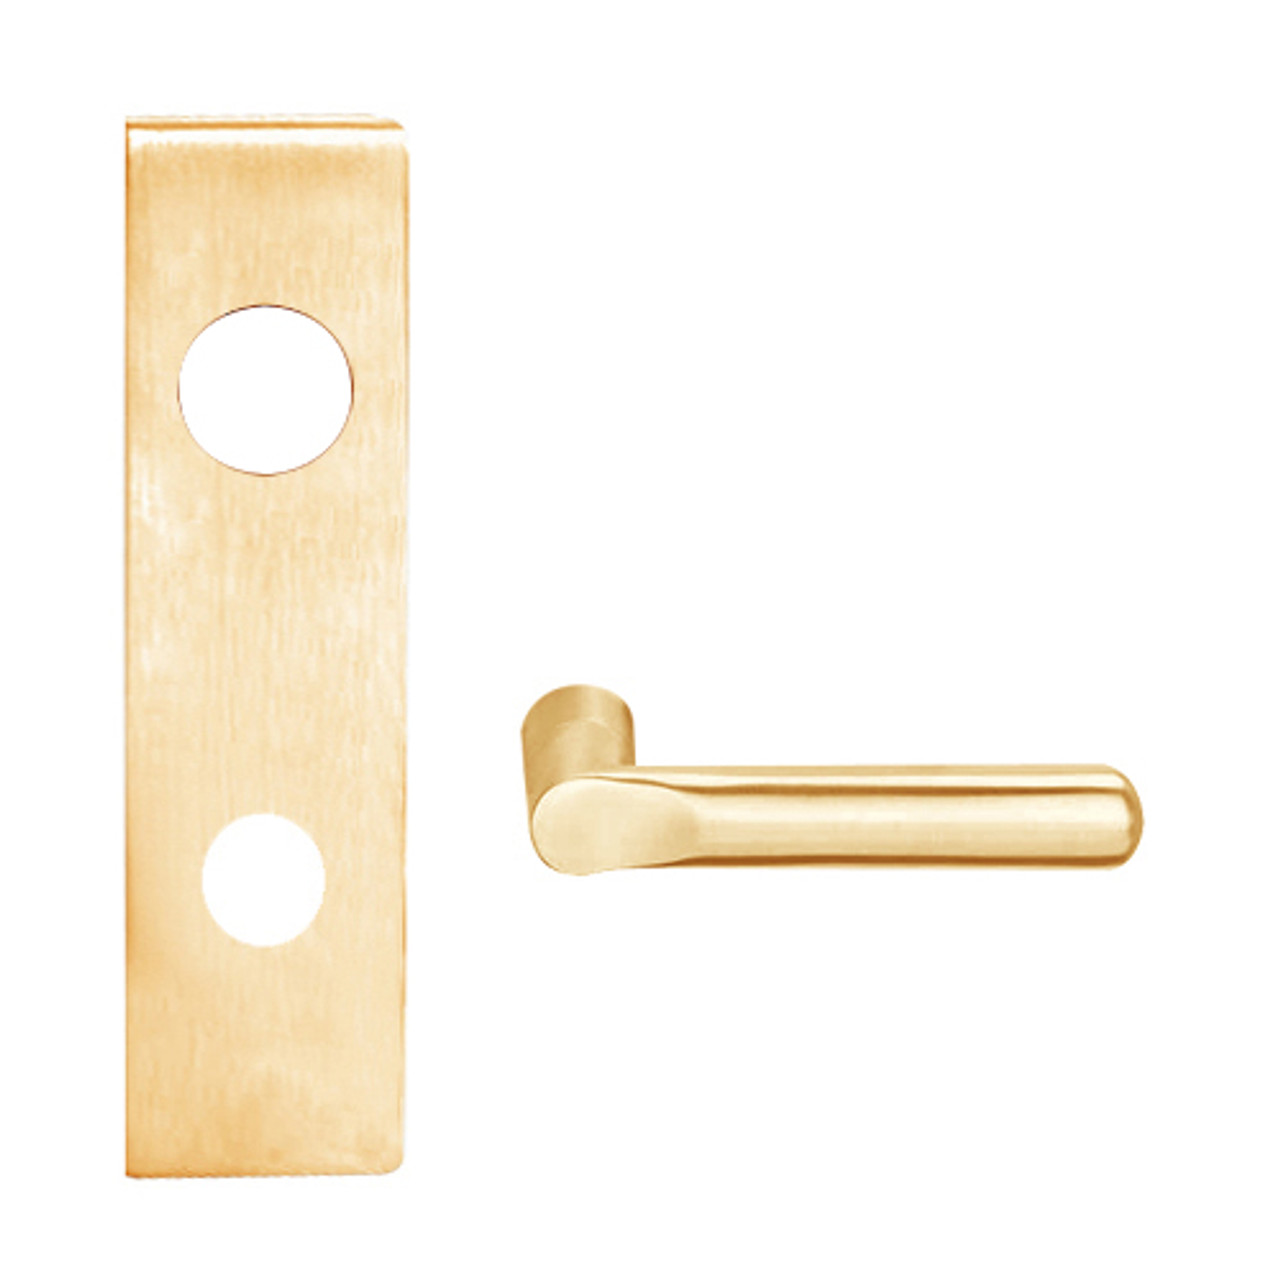 L9026J-18N-612 Schlage L Series Exit Lock with Cylinder Commercial Mortise Lock with 18 Cast Lever Design Prepped for FSIC in Satin Bronze